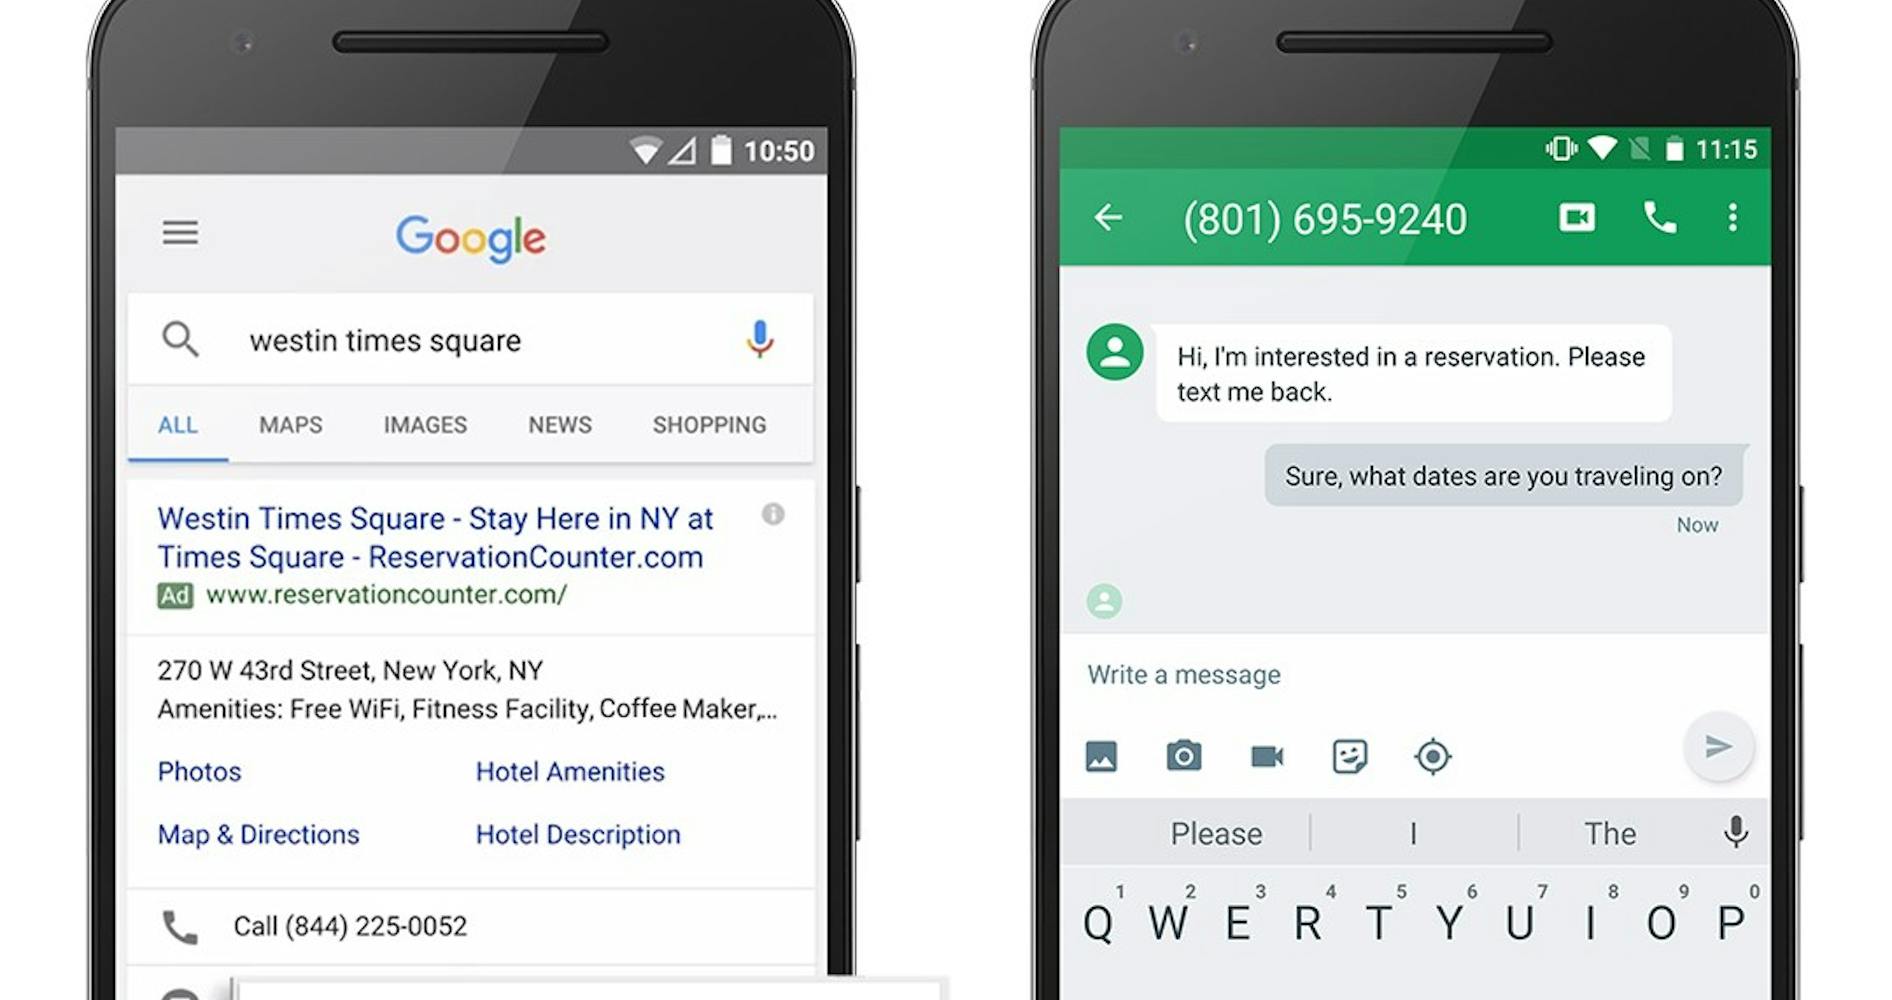 AdWords Message Extensions